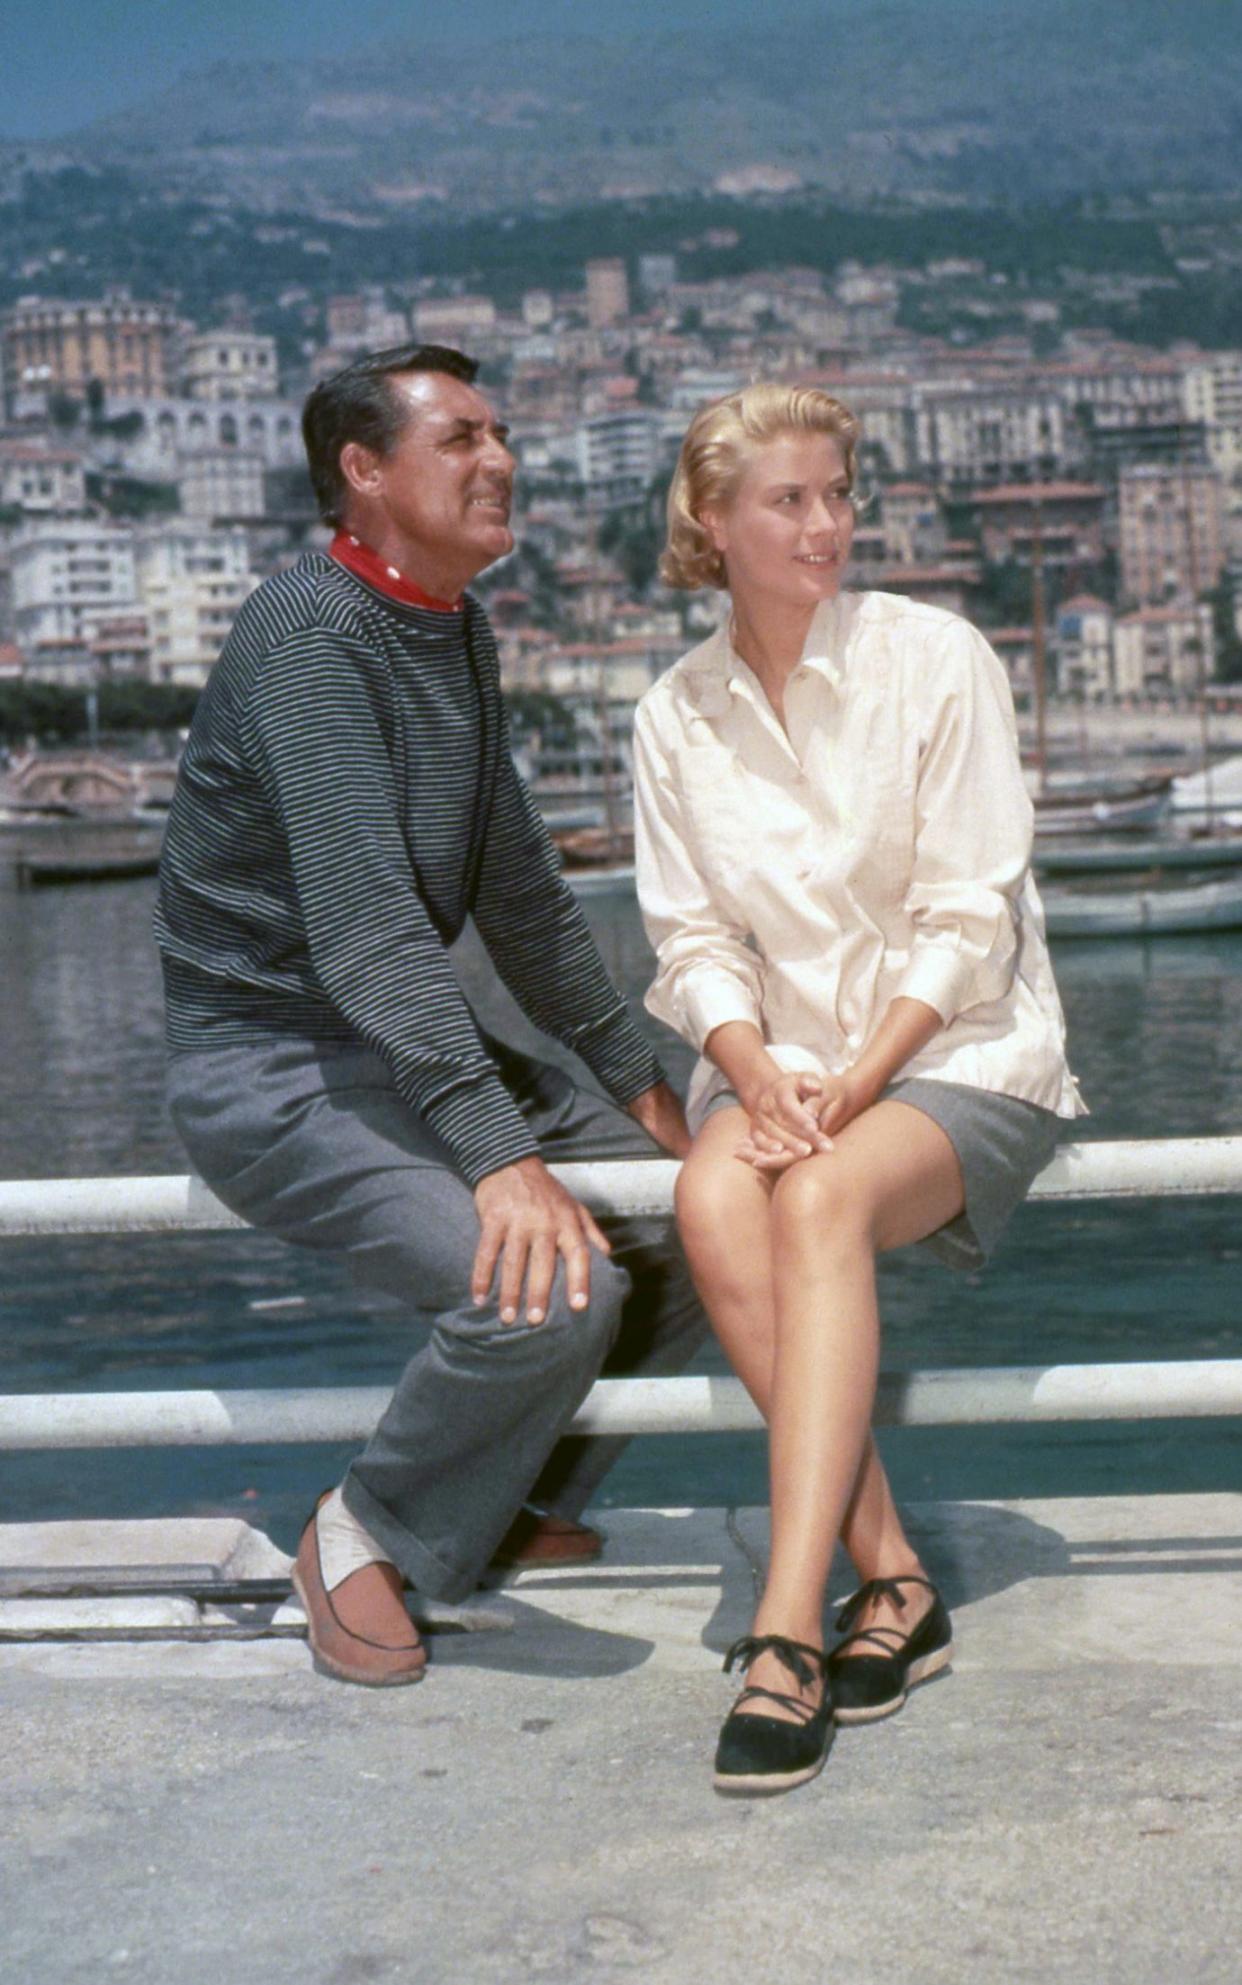 Cary Grant and Grace Kelly on the set of To Catch a Thief  - Corbis Historical